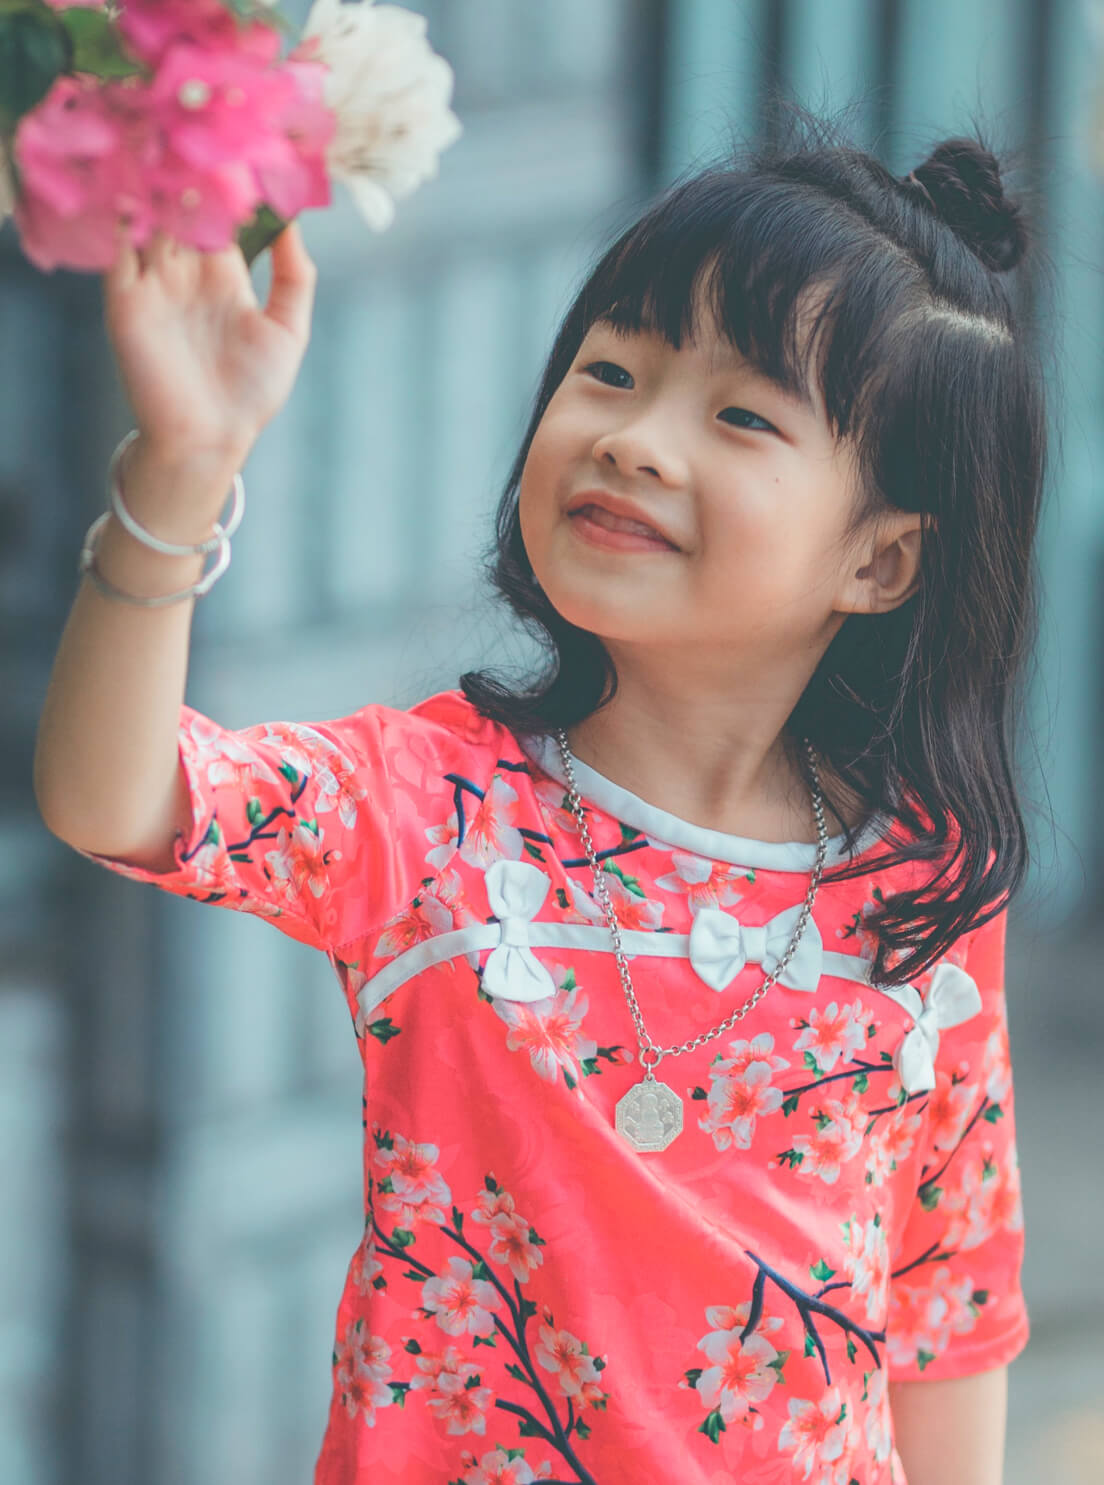 Photo of young girl touching flowers